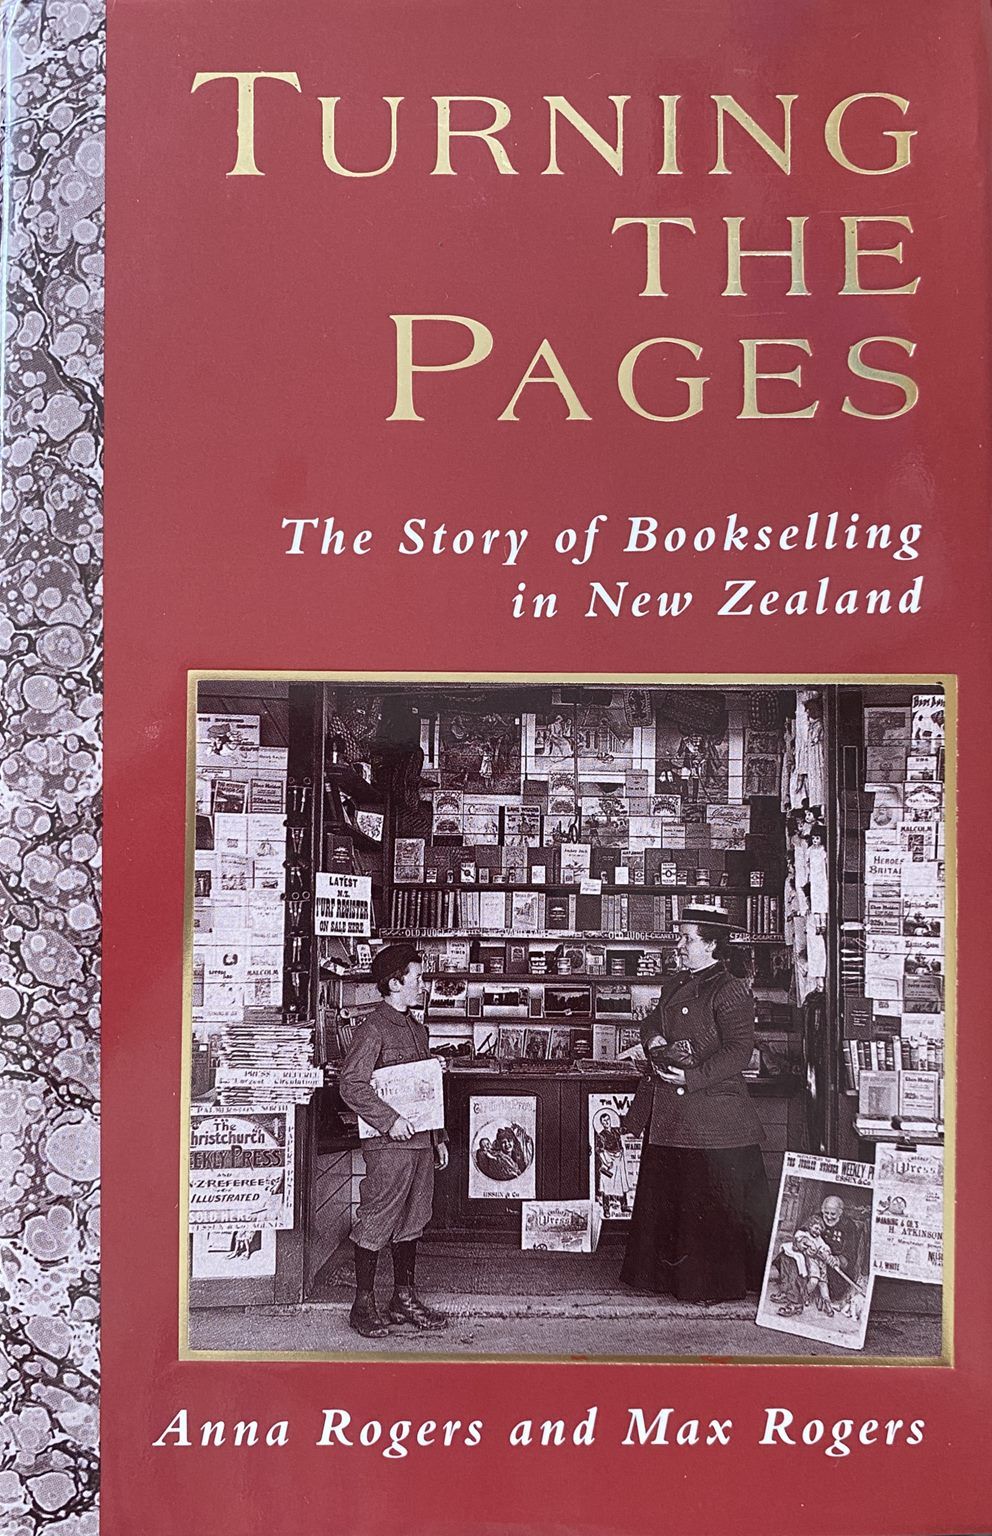 TURNING THE PAGES: The history of Bookselling in New Zealand